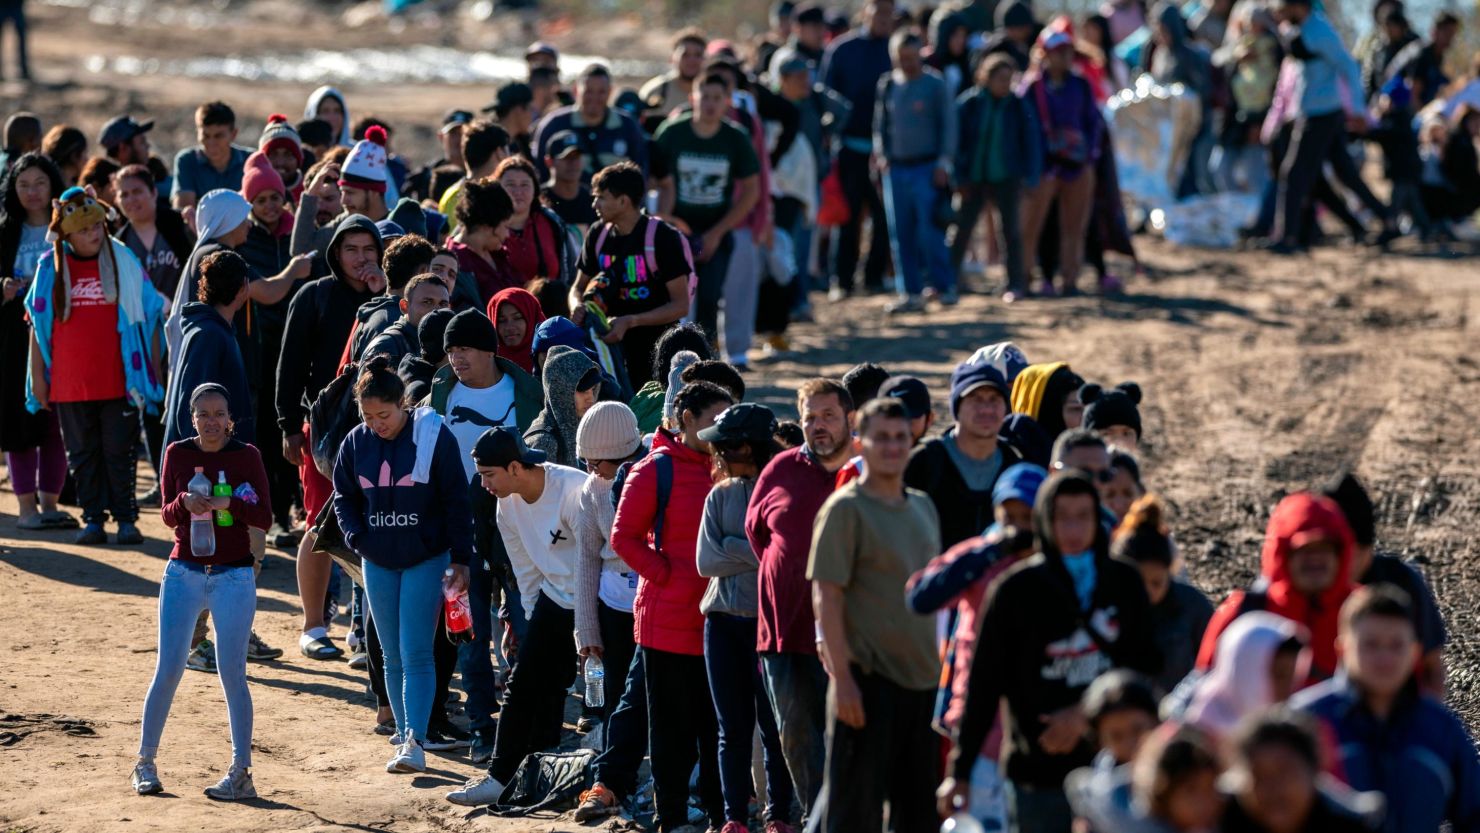 More than 1,000 migrants wait in line to be processed by US Border Patrol agents after crossing the Rio Grande from Mexico on December 18 in Eagle Pass, Texas.